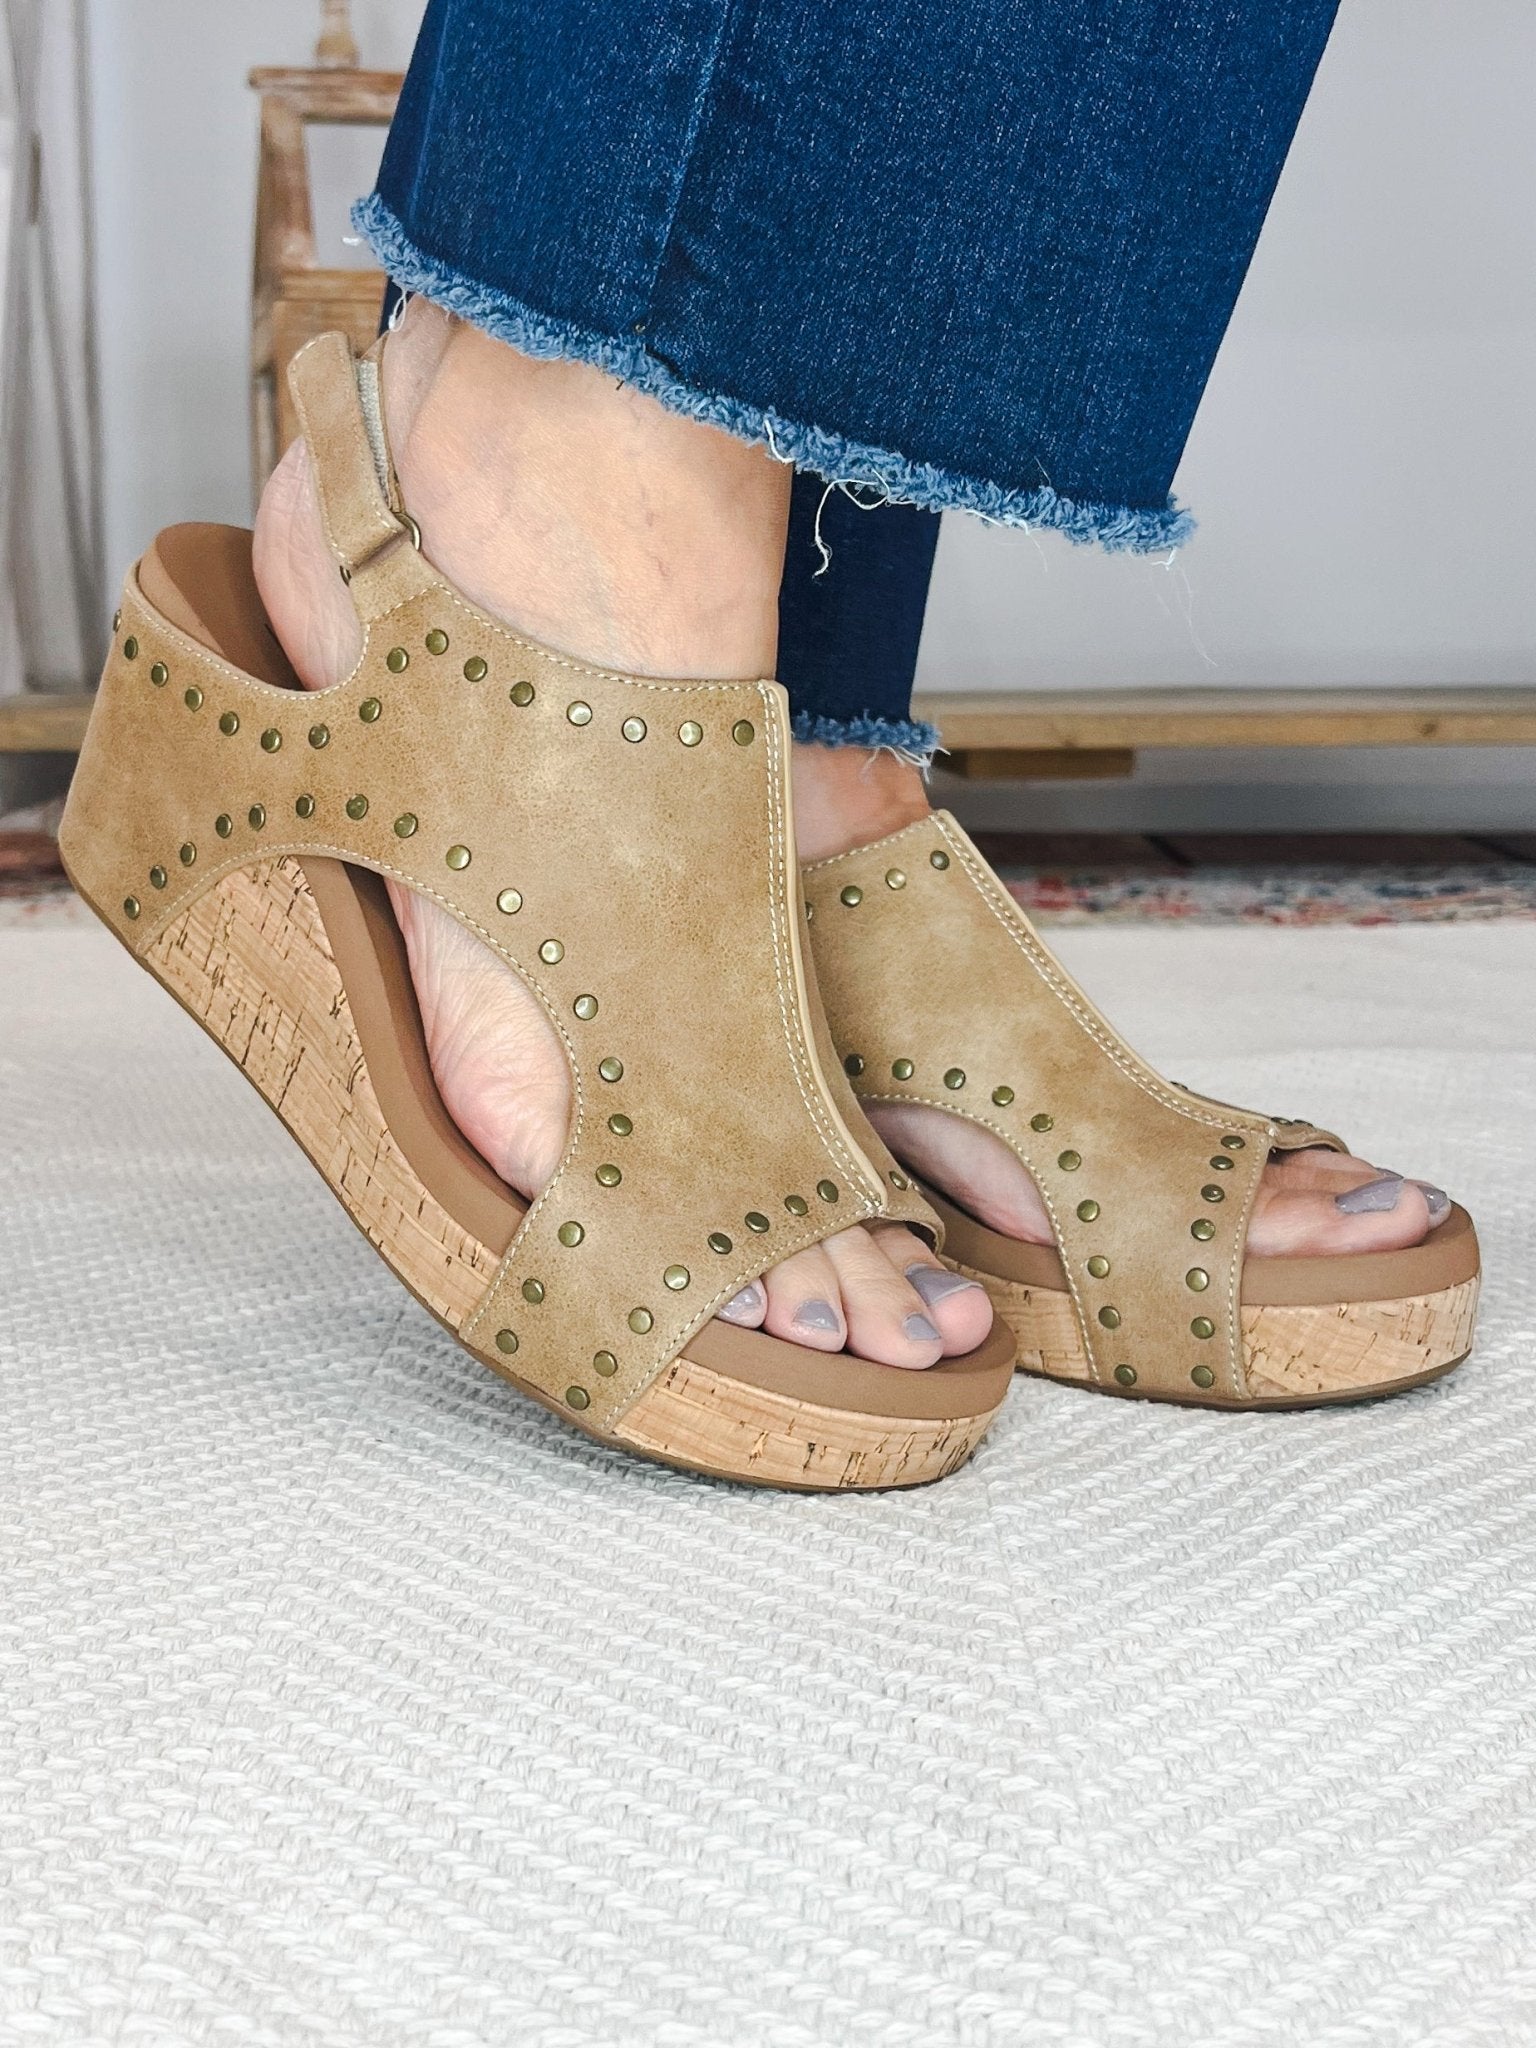 Carley Wedge Sandal - Taupe Oil with Studs - Lavender Hills BeautyCorkys Footwear30 - 5316 - TOST - 6